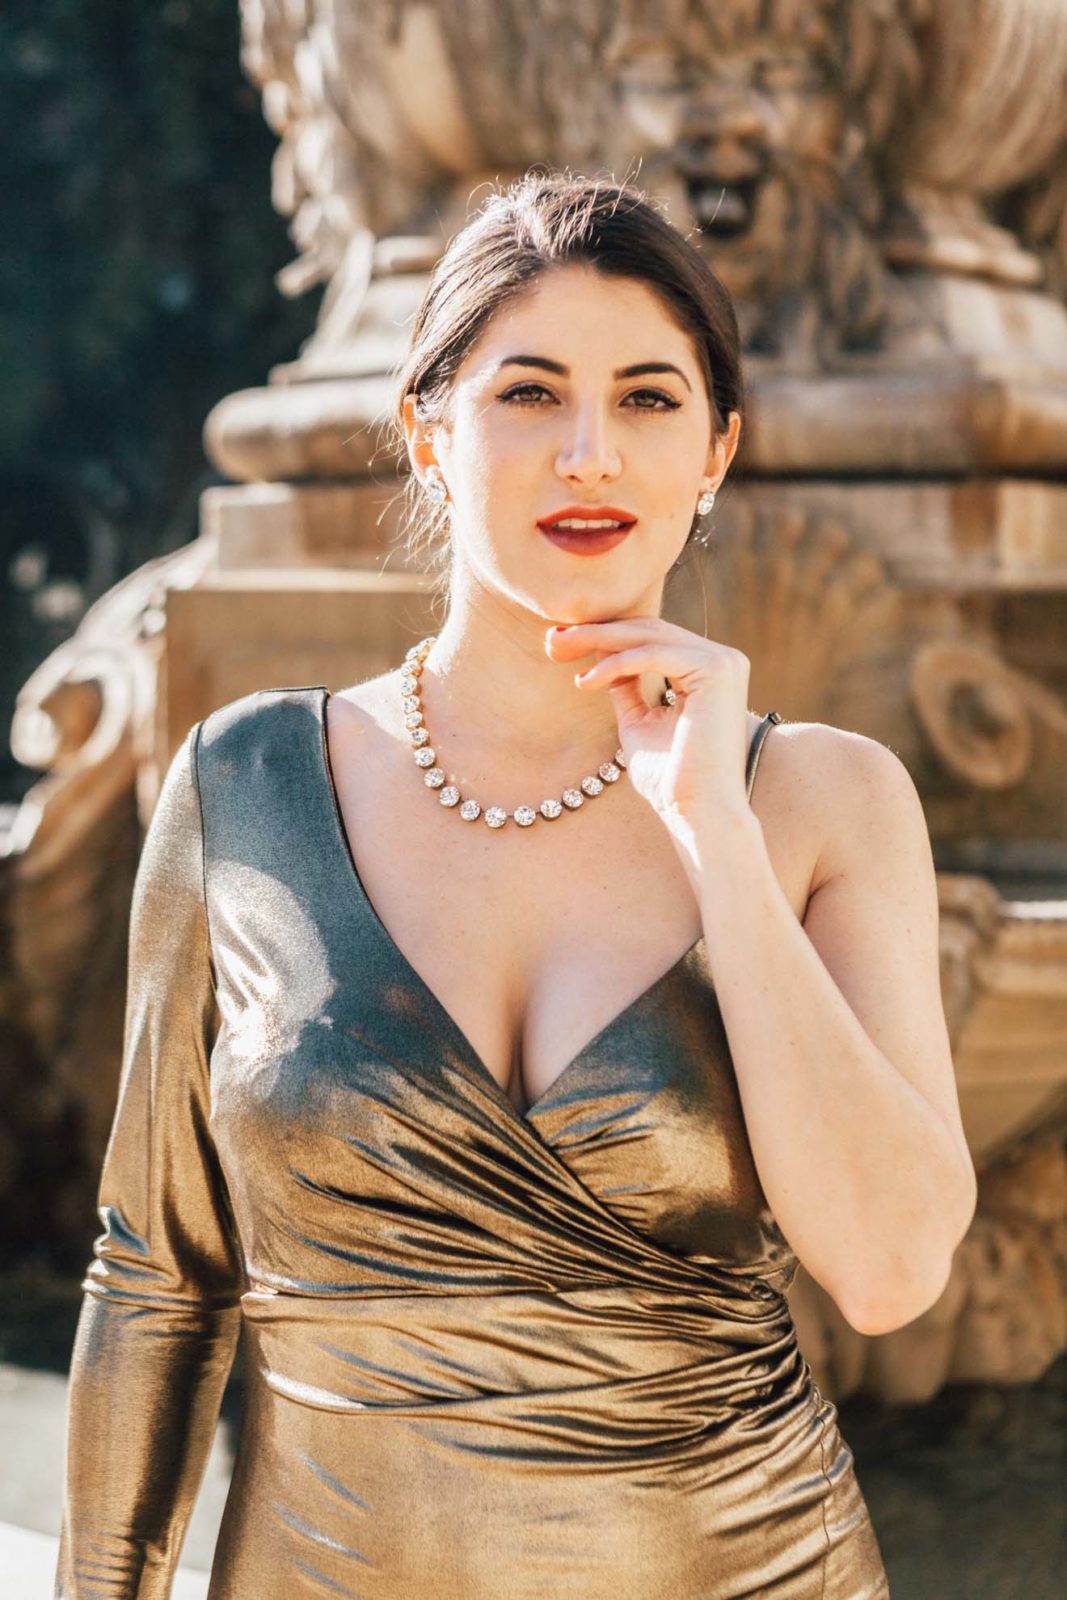 12 Days of Holiday Style | Gold Metallic Dress | 5 Ways to De-Stress for the Holidays | Nordstrom | Last Minute Gifts for Her, Him & Home featured by top Los Angeles lifestyle blog Laura Lily